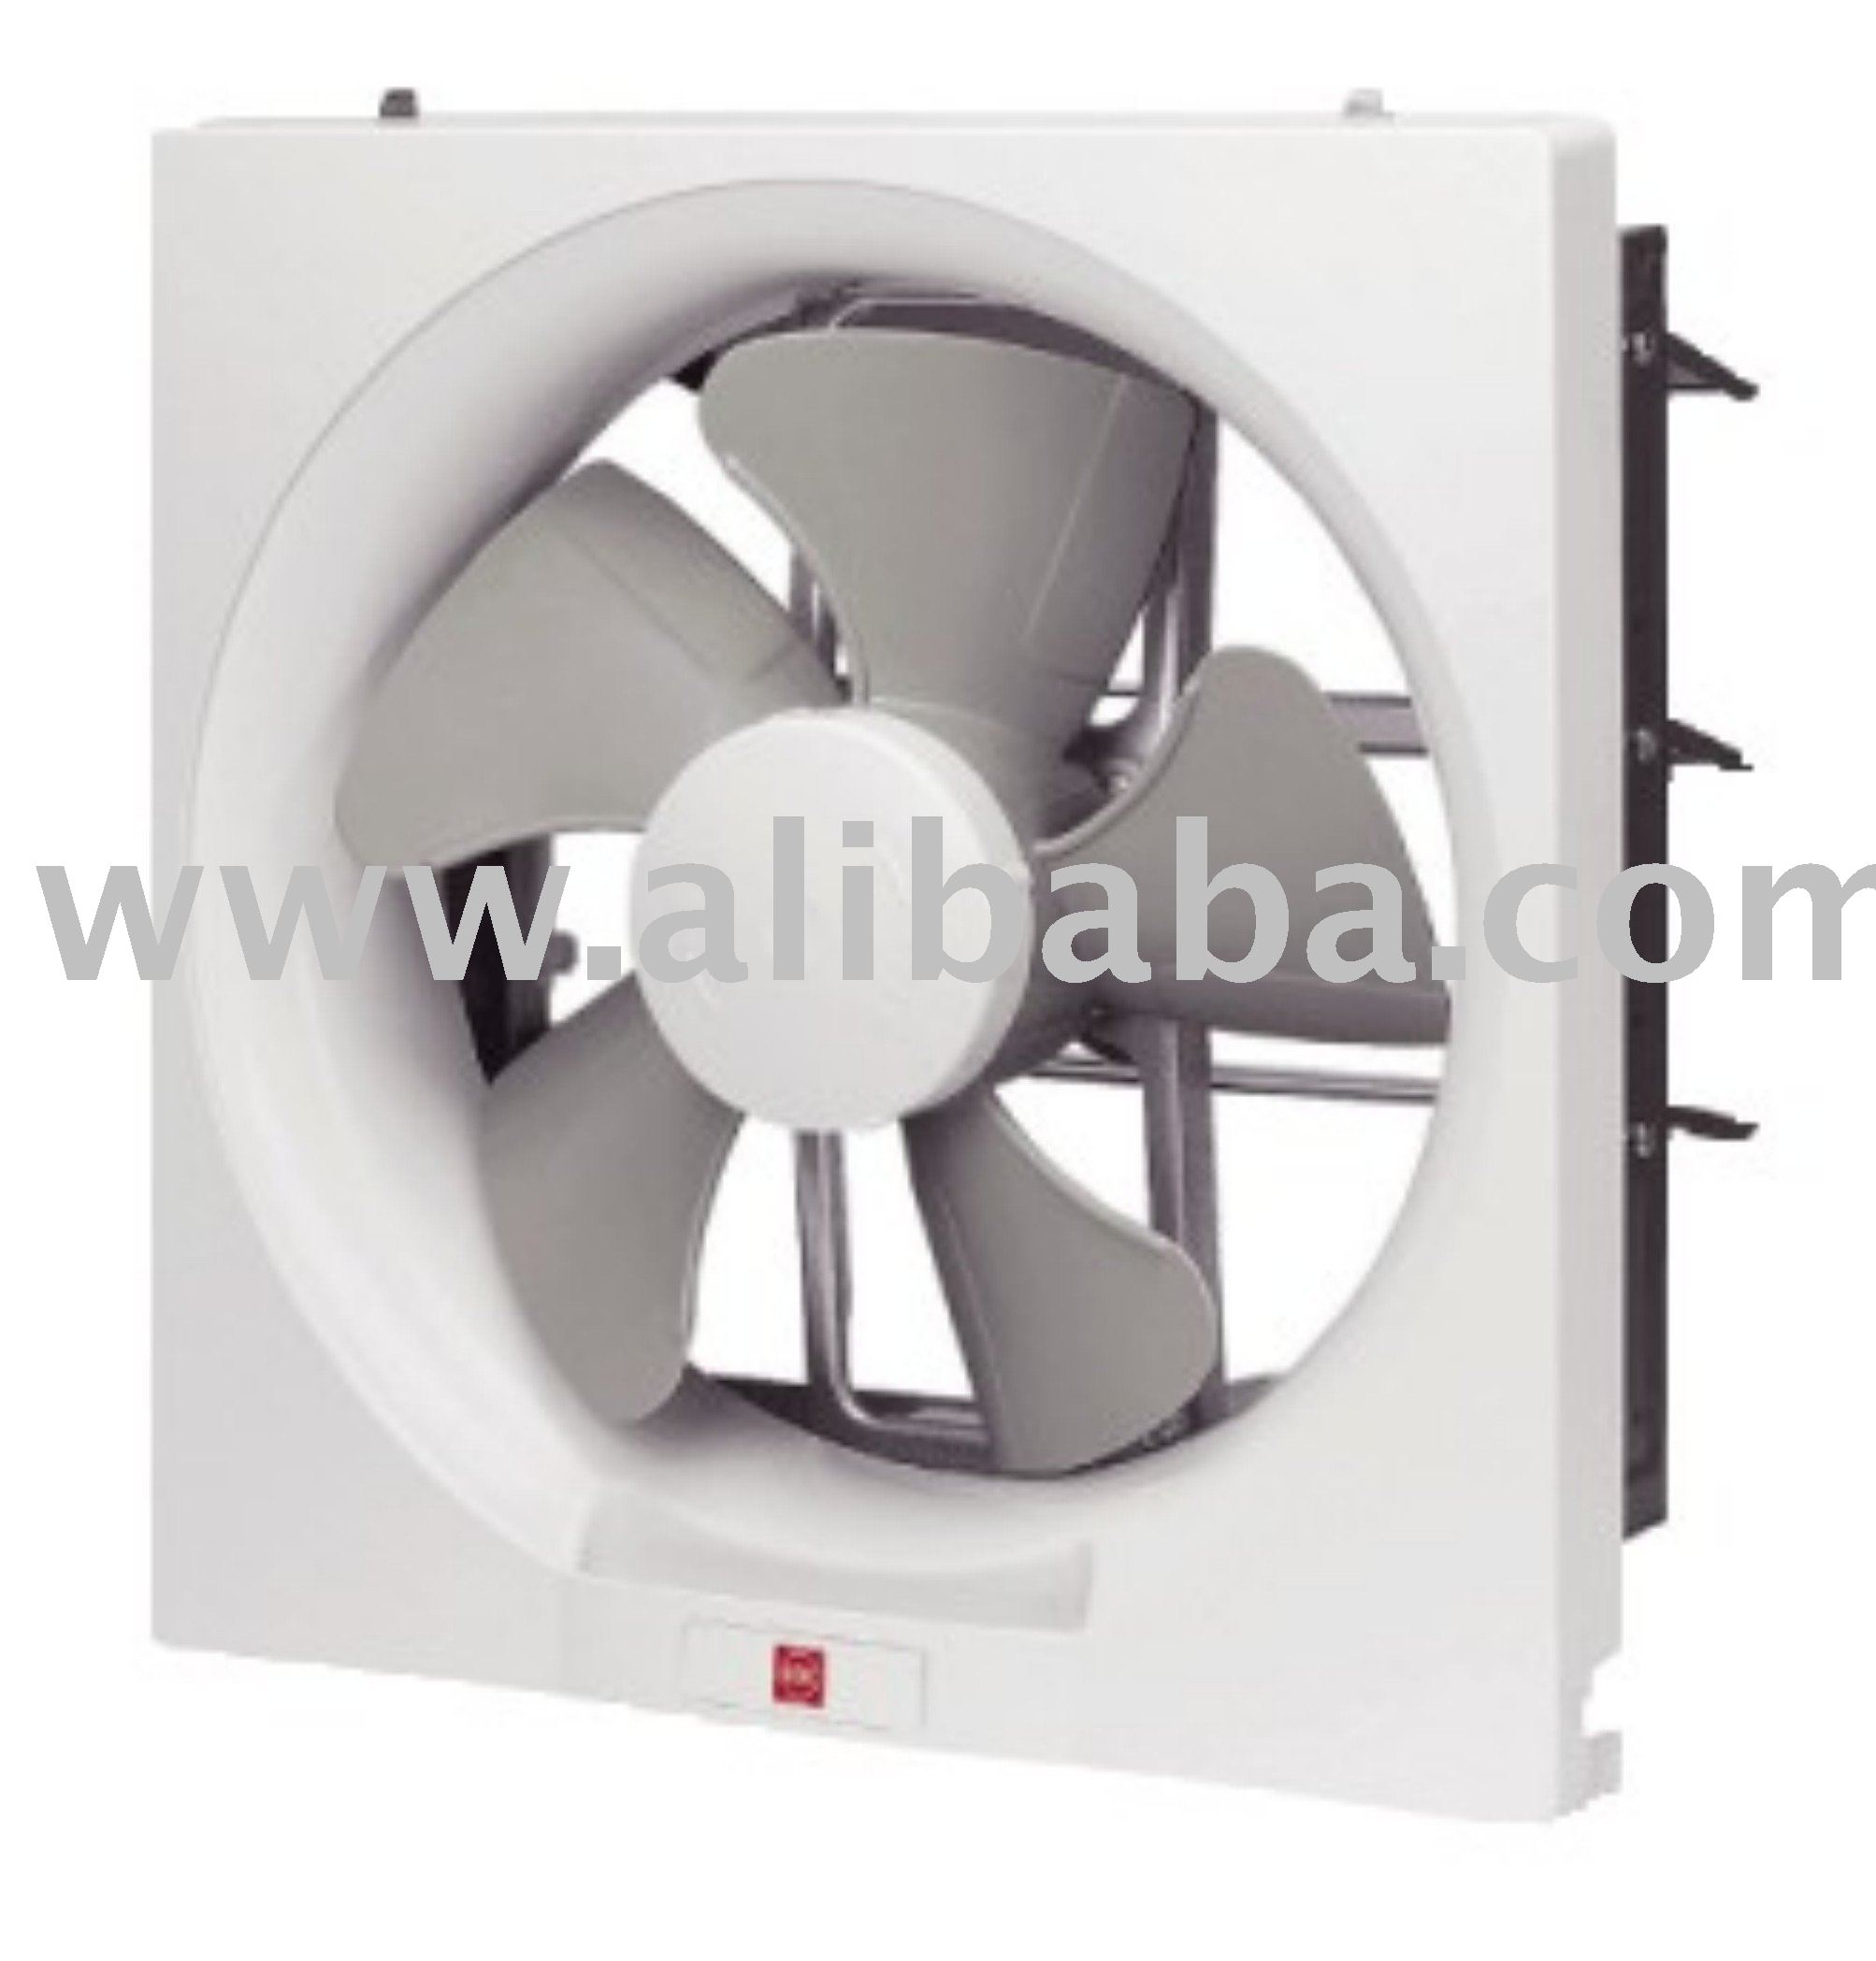 BATHROOM FANS - CEILING MOUNTED, WALL MOUNTED  EXTERIOR BATHROOM